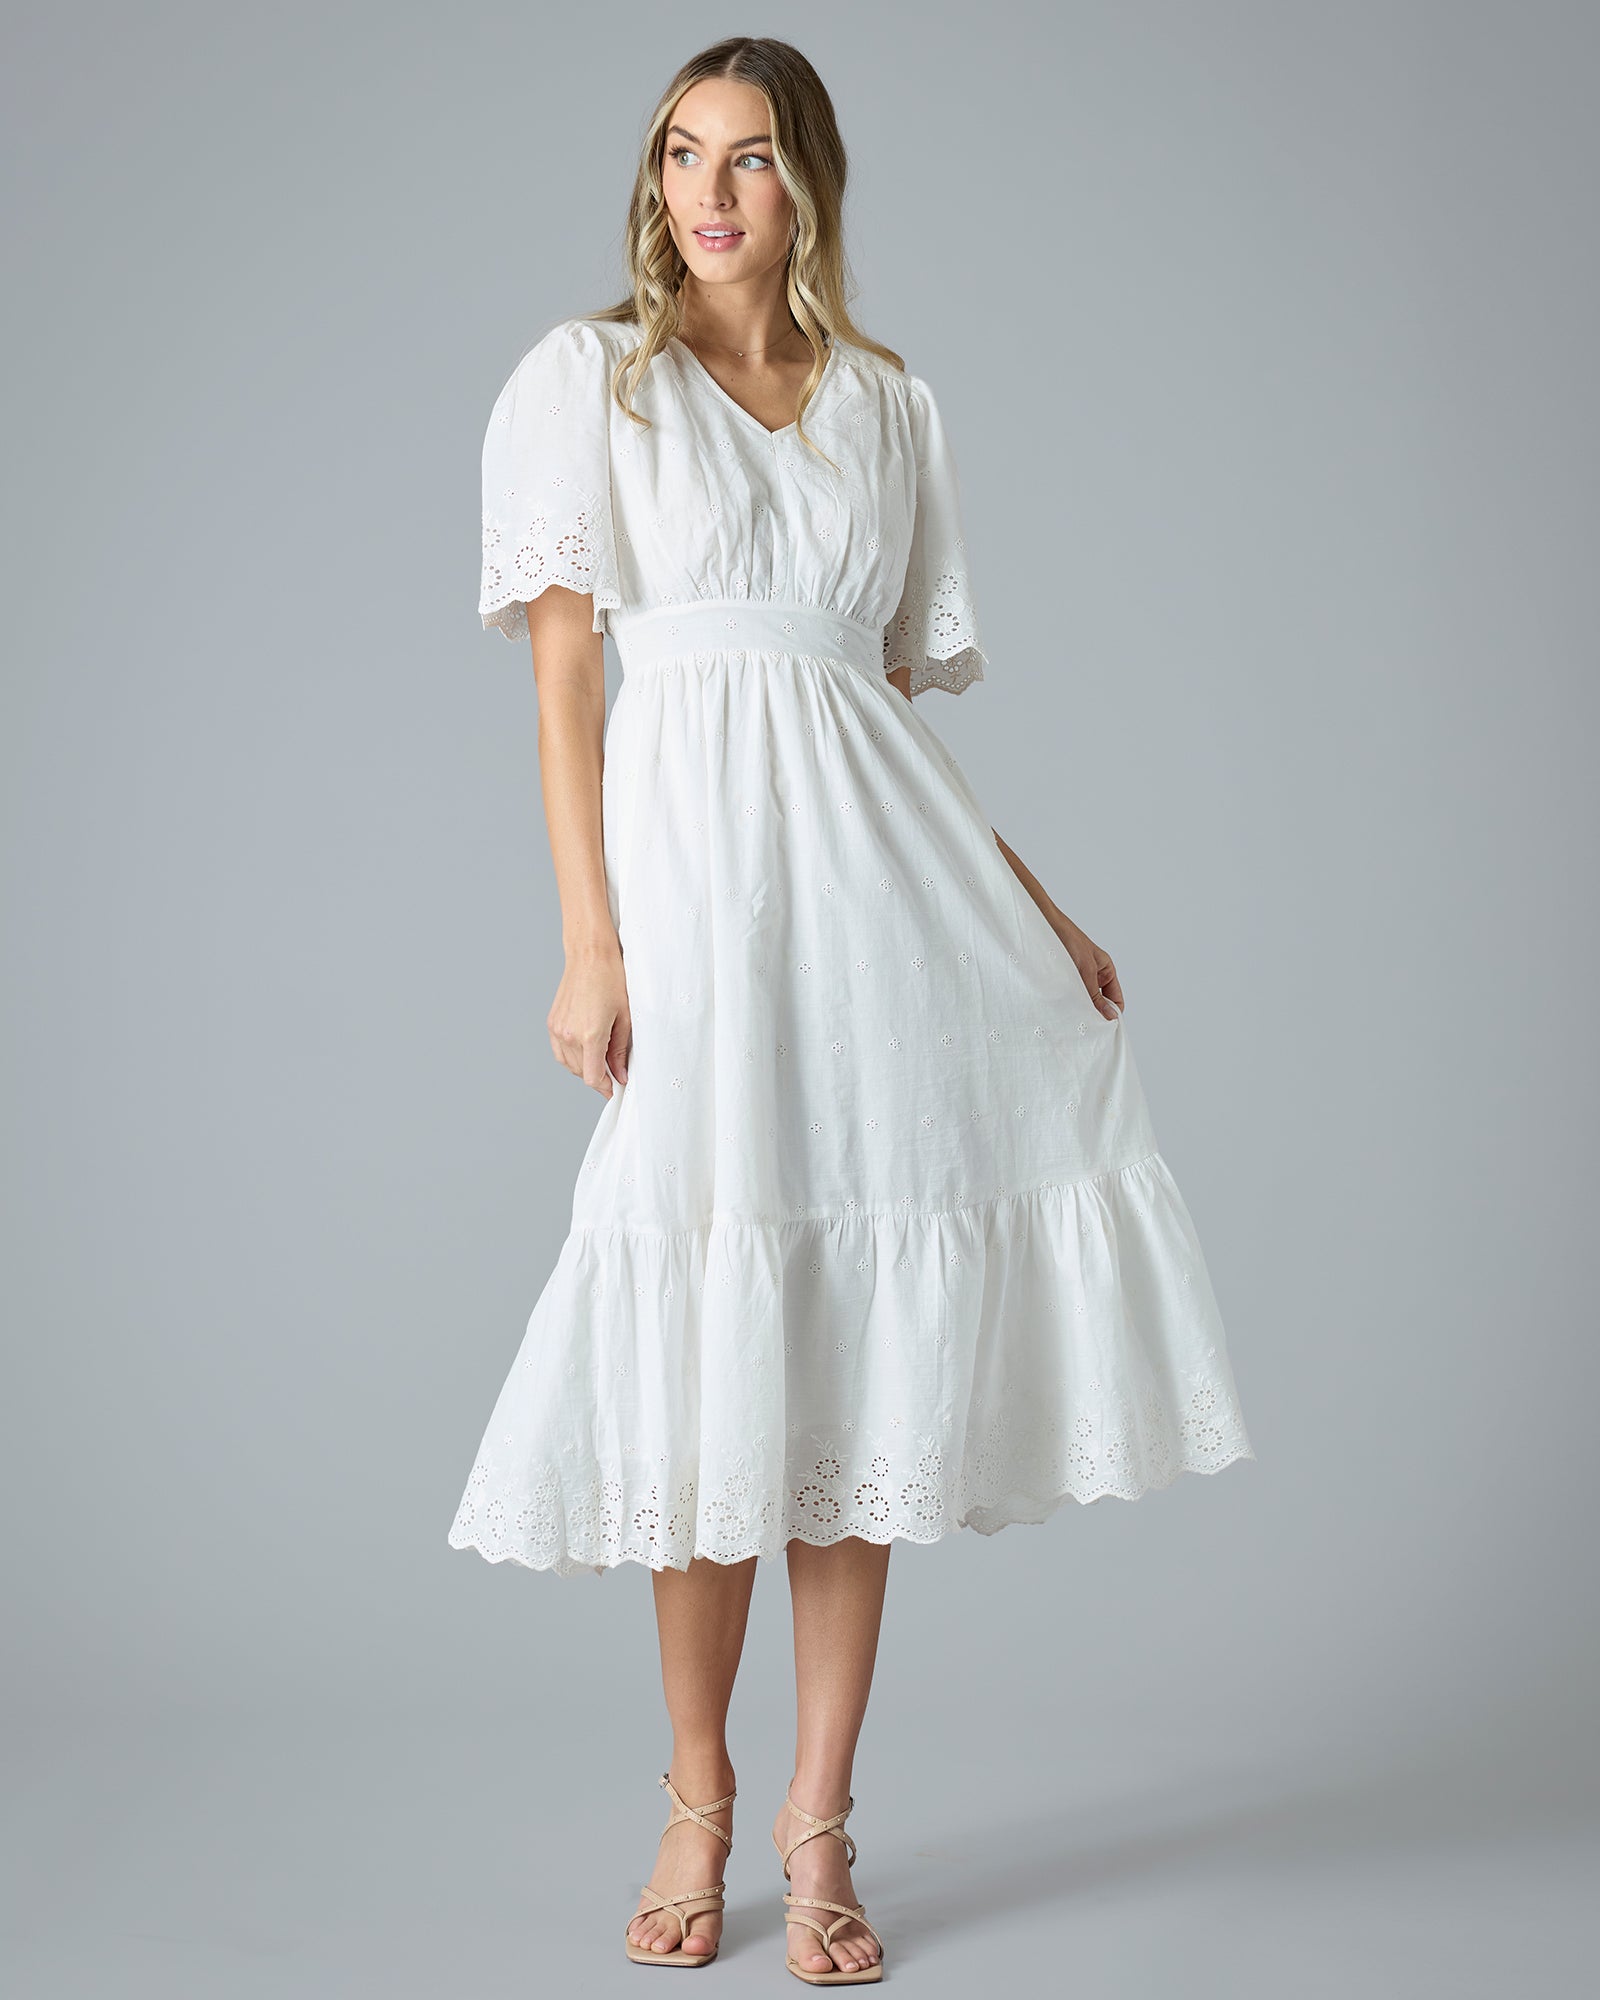 Woman in a white short sleeve, midi-length dress with eyelet details on hem